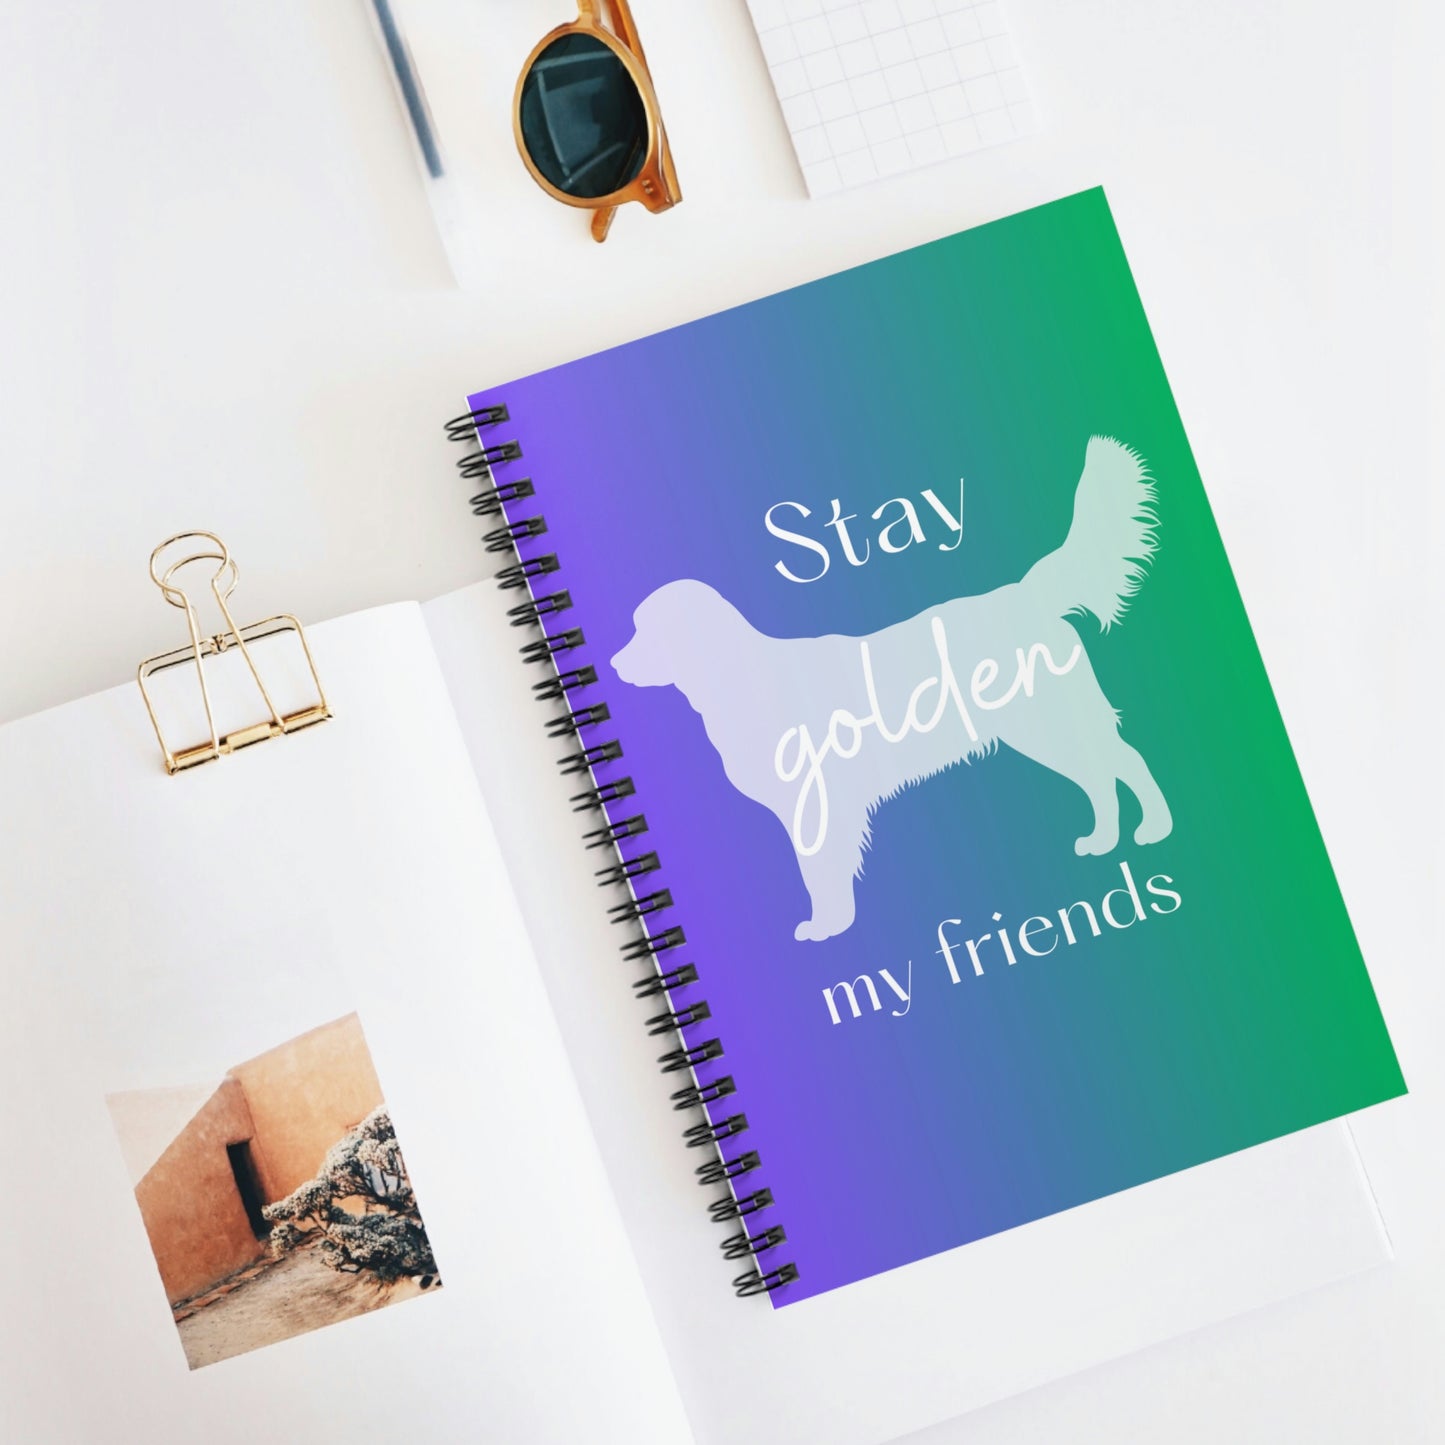 Stay Golden My Friends Spiral Notebook (Blue/Green Ombre) - Ruled Line